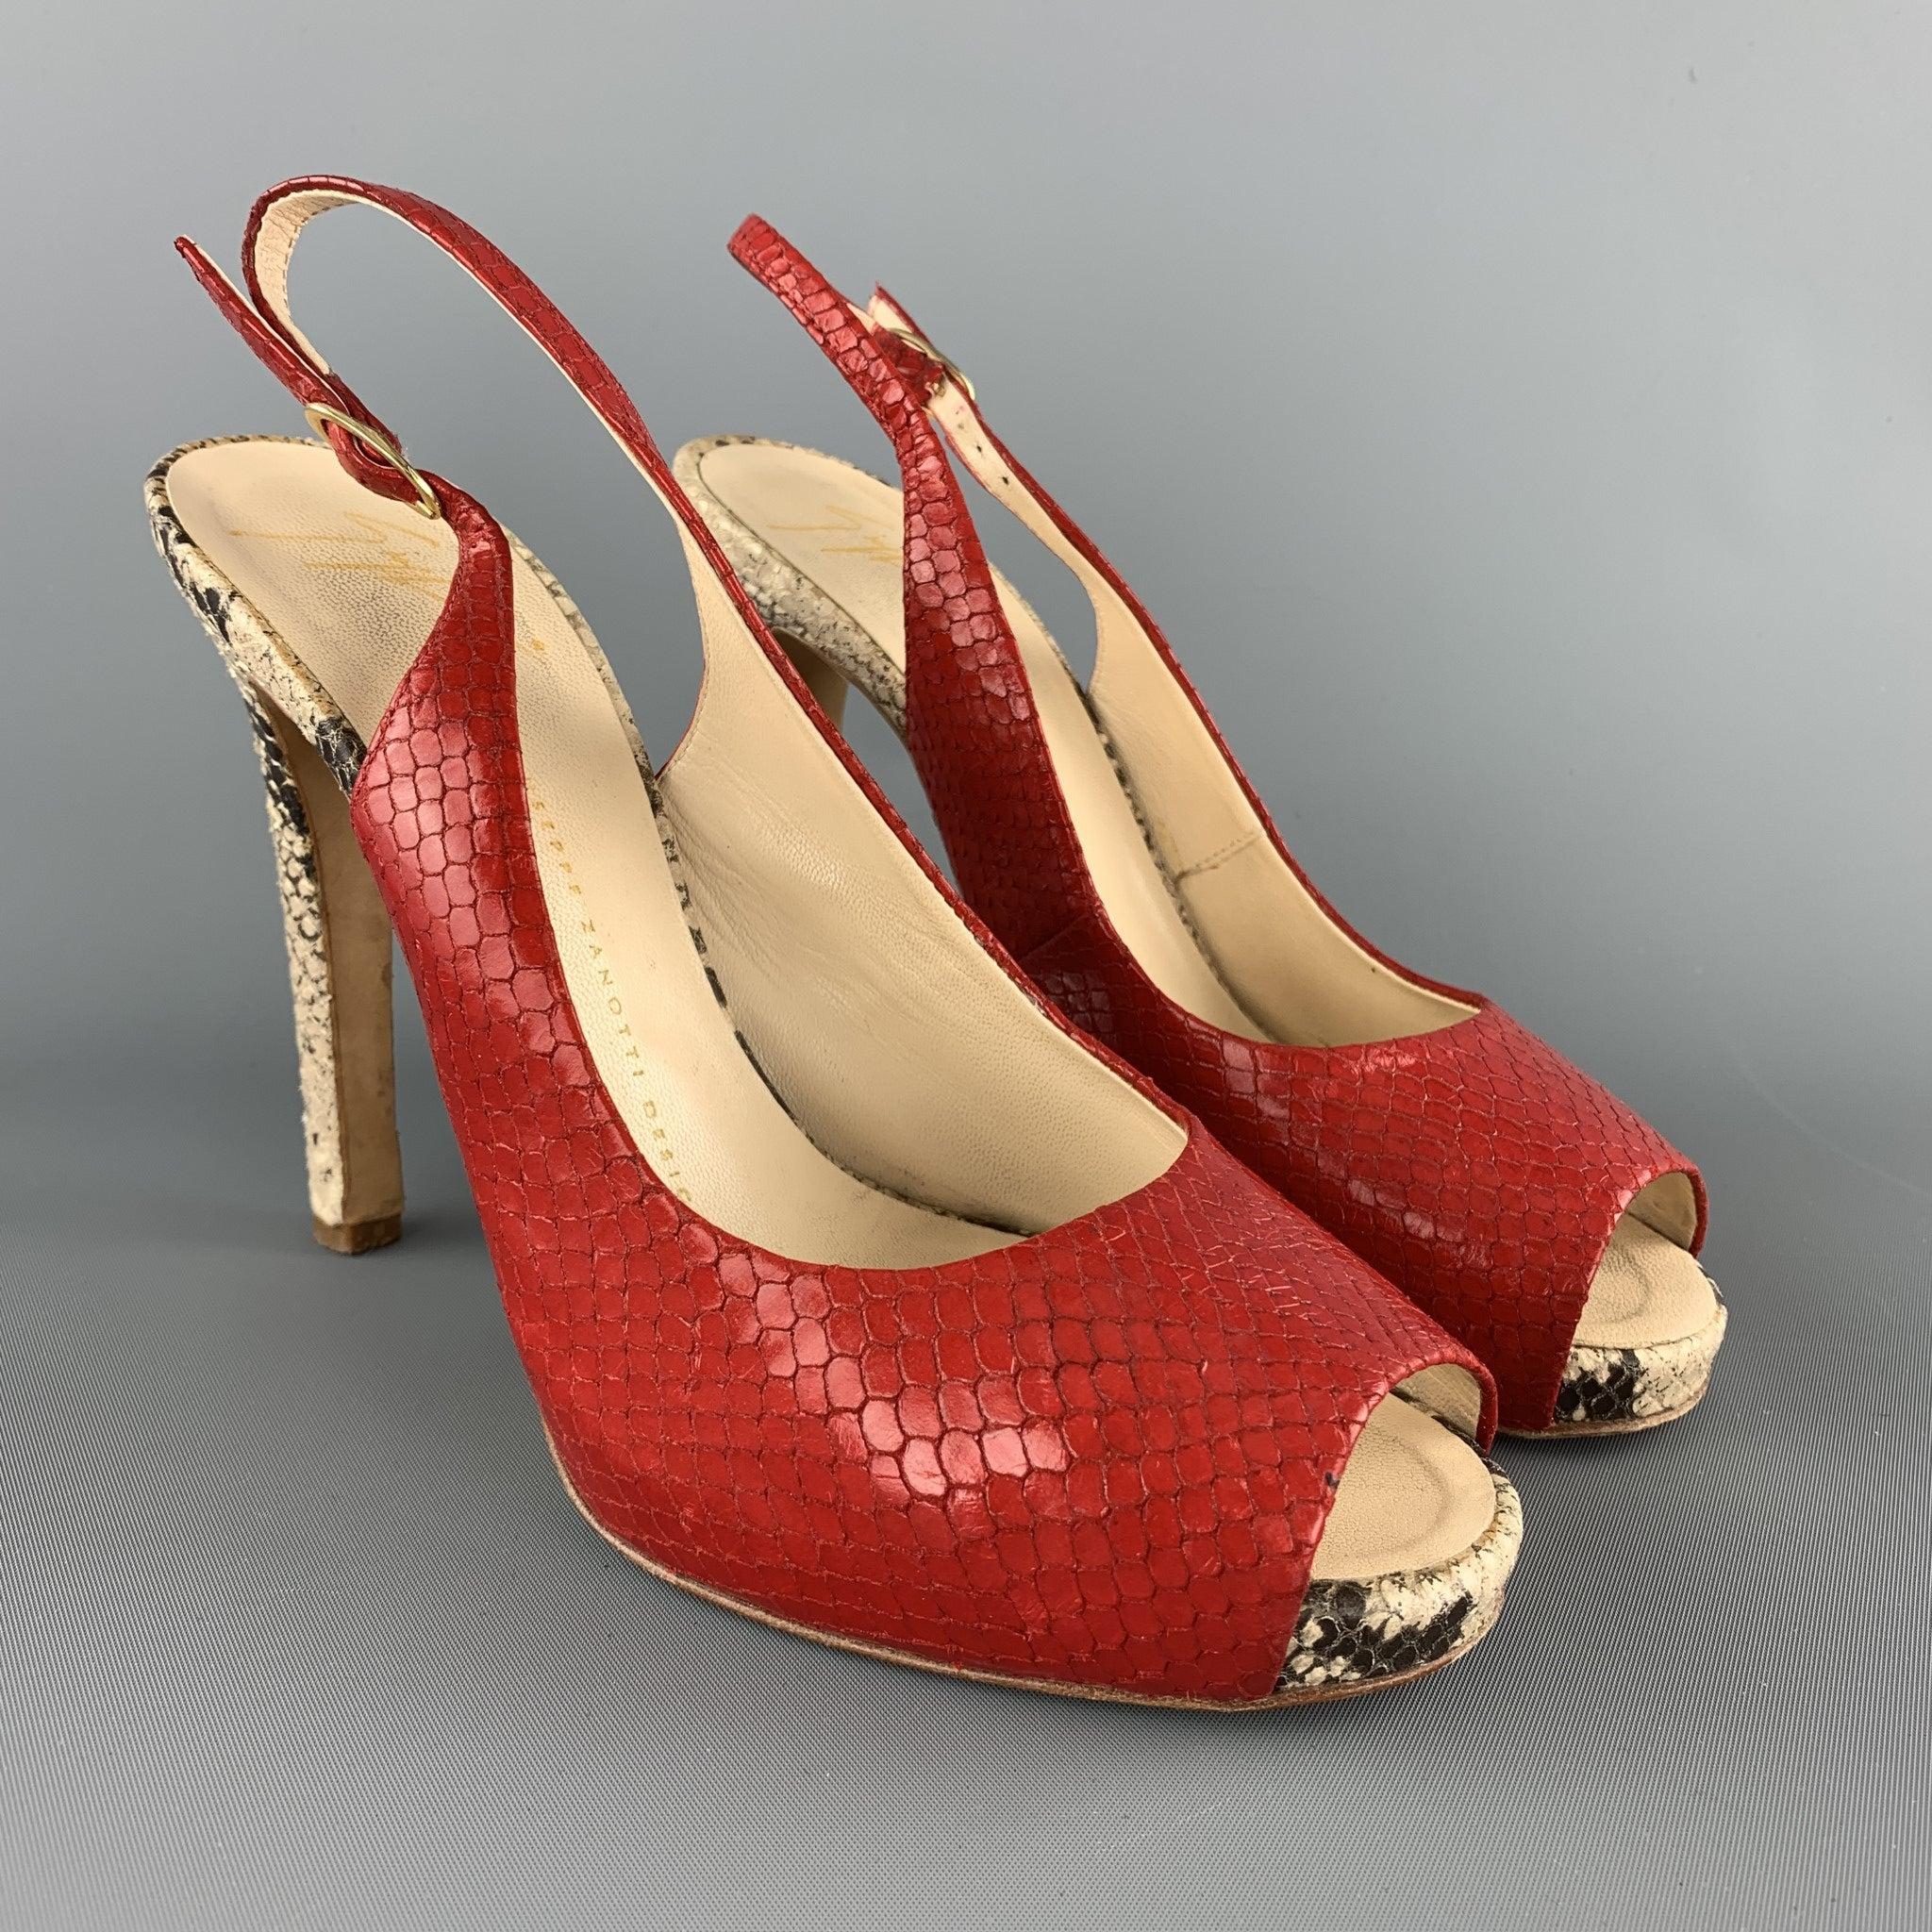 GUISEPPE ZANOTTI slingback pumps come in red snakeskin leather with a natural beige snake leather covered heel and platform. Made in Italy.Very Good
Pre-Owned Condition. 

Marked:   IT 38
Heel: 4.95 inches Platform: 0.65 inches 
  
  
 
Reference: